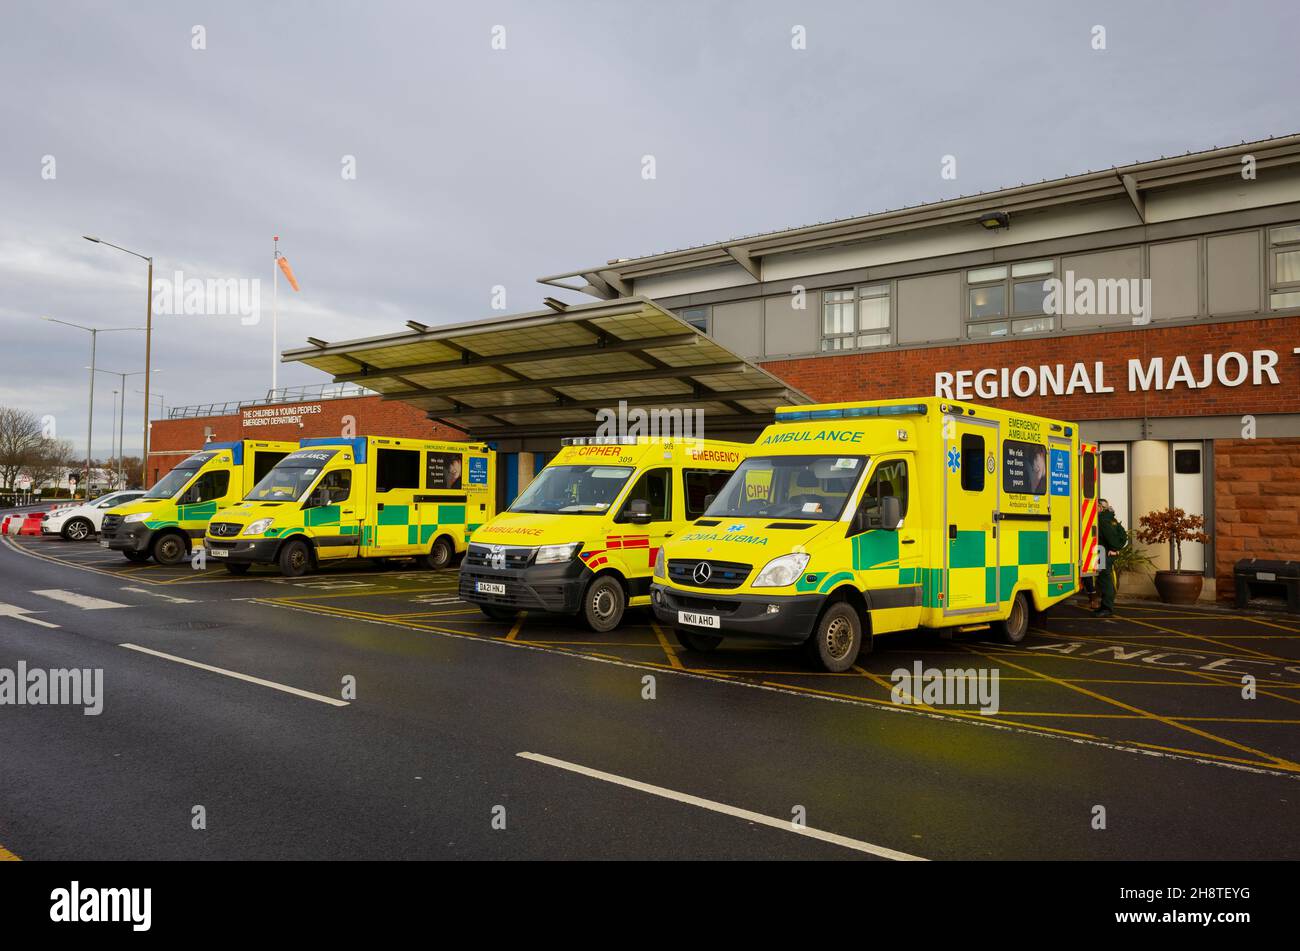 NHS Ambulances outside the Regional Major Trauma Centre or Accident and Emergency at Jame's Cook University Hospital Middlesbrough Stock Photo